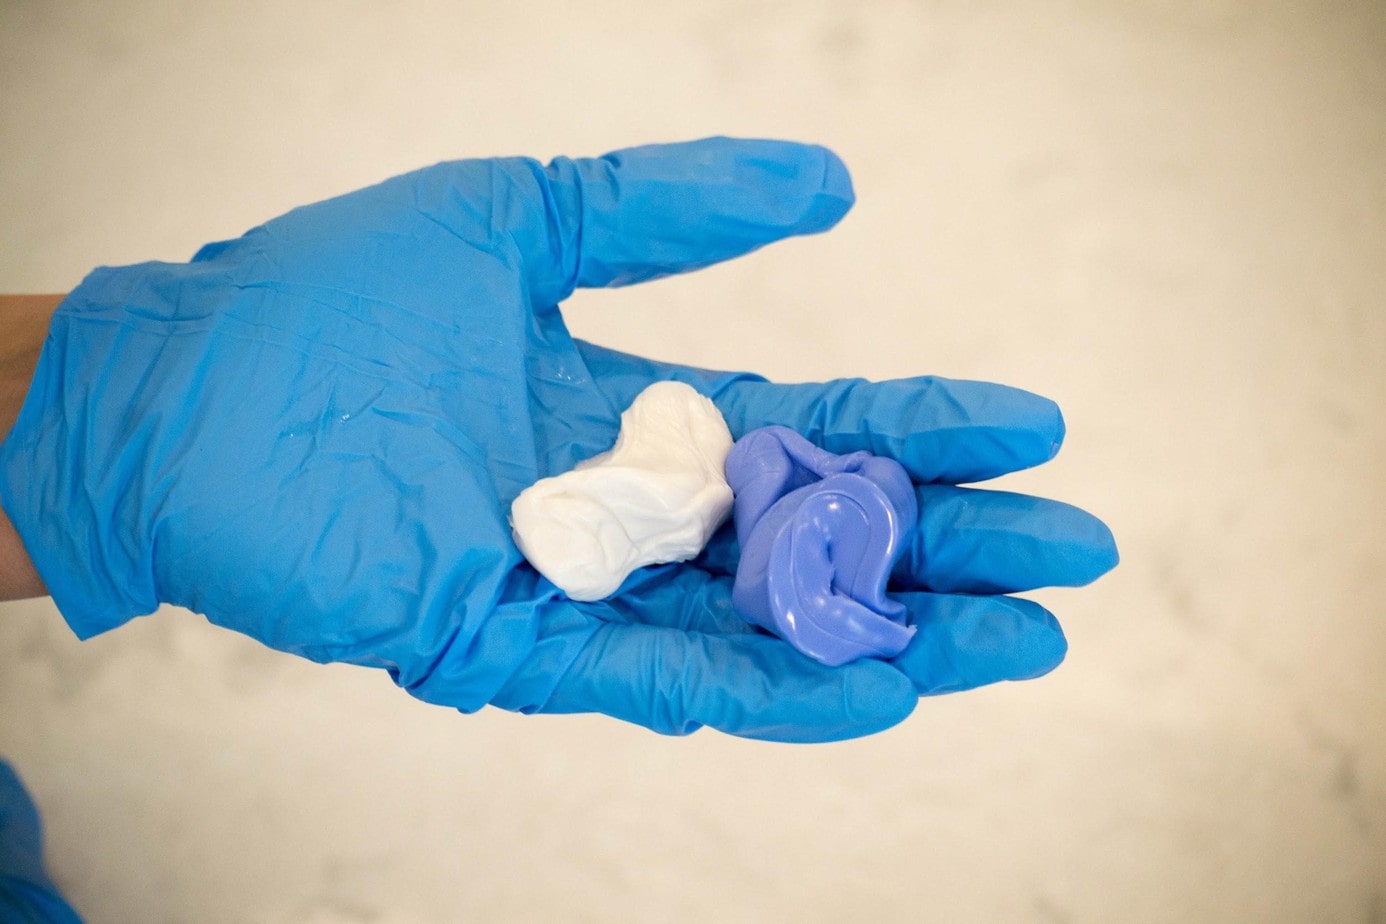 Two types of putty in gloved hand